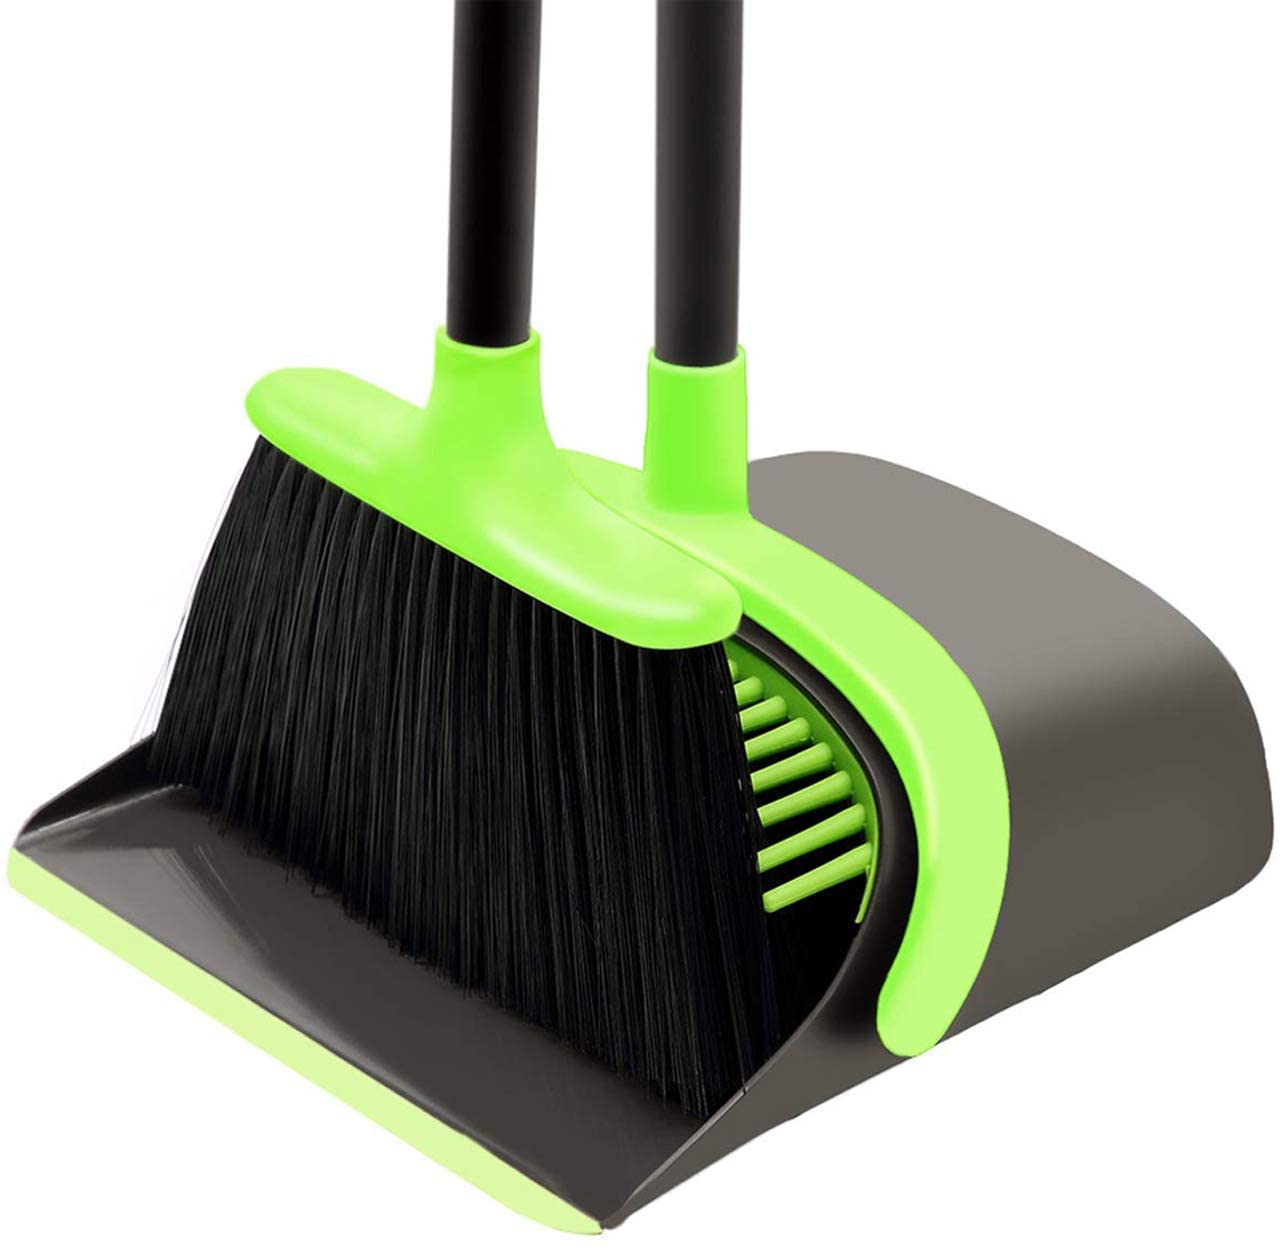 SANGFOR Extendable Cleaning Upright Broom Combo & Dustpan Set